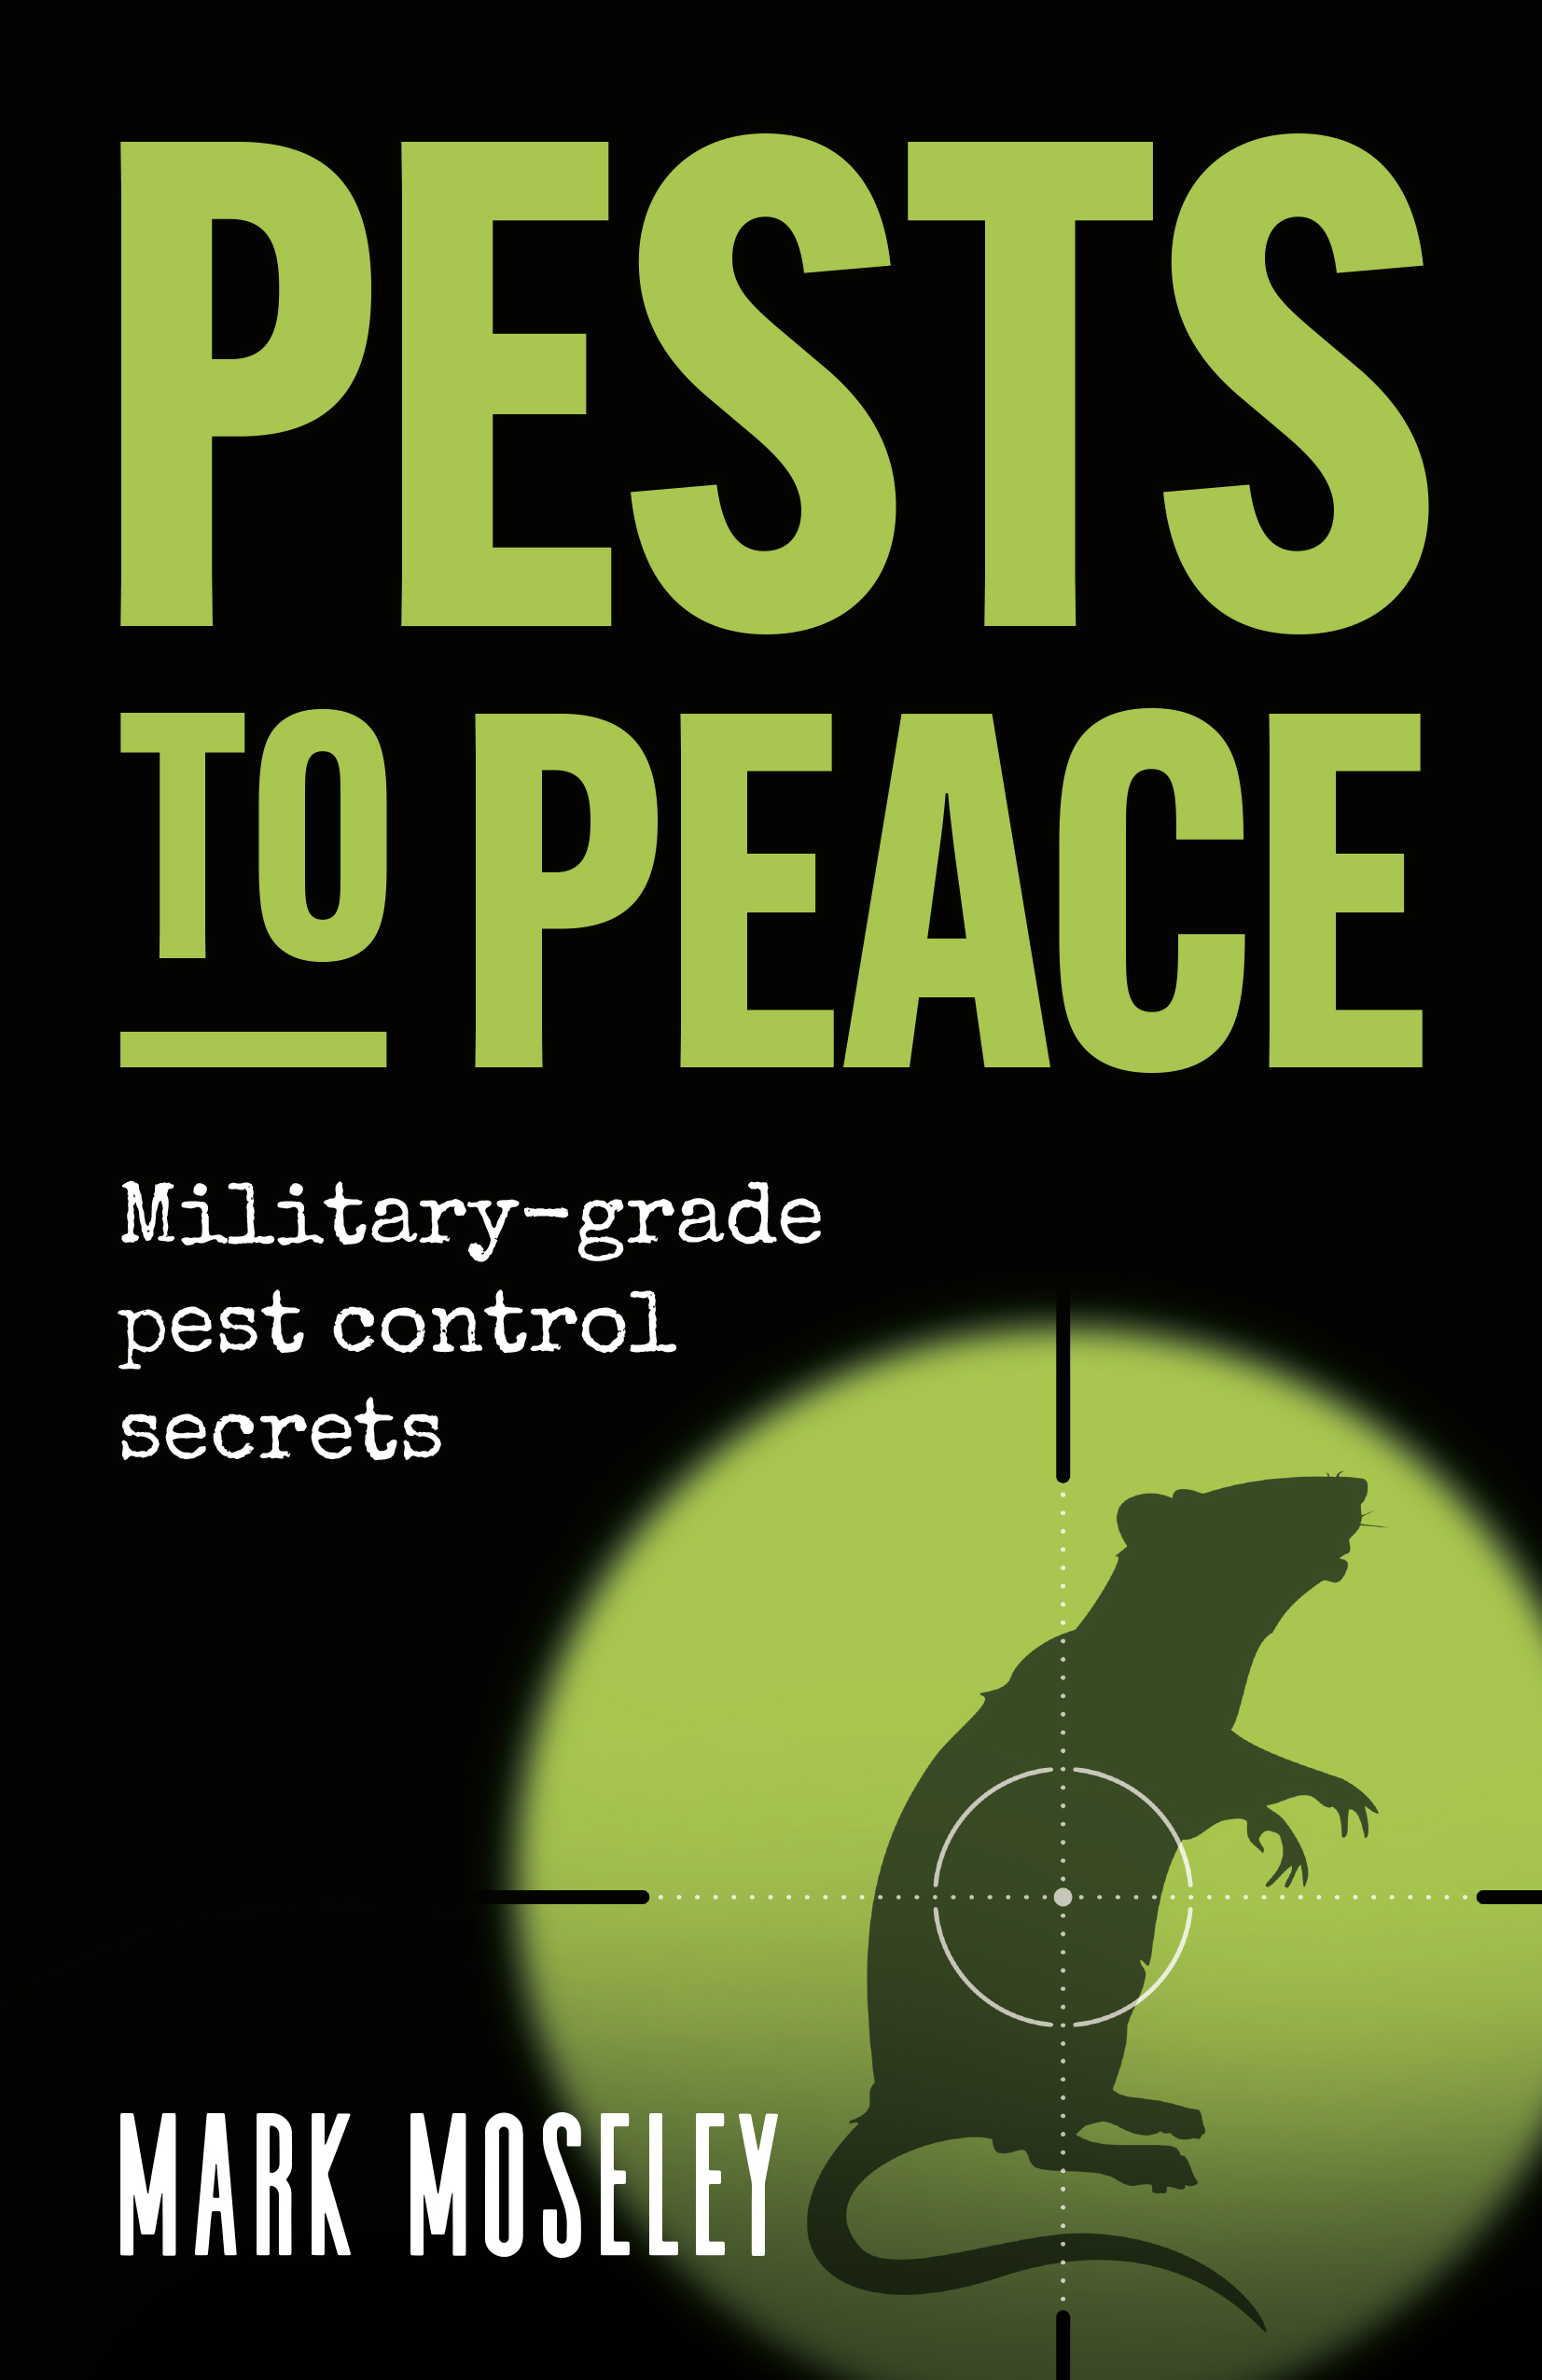 Pests to Peace